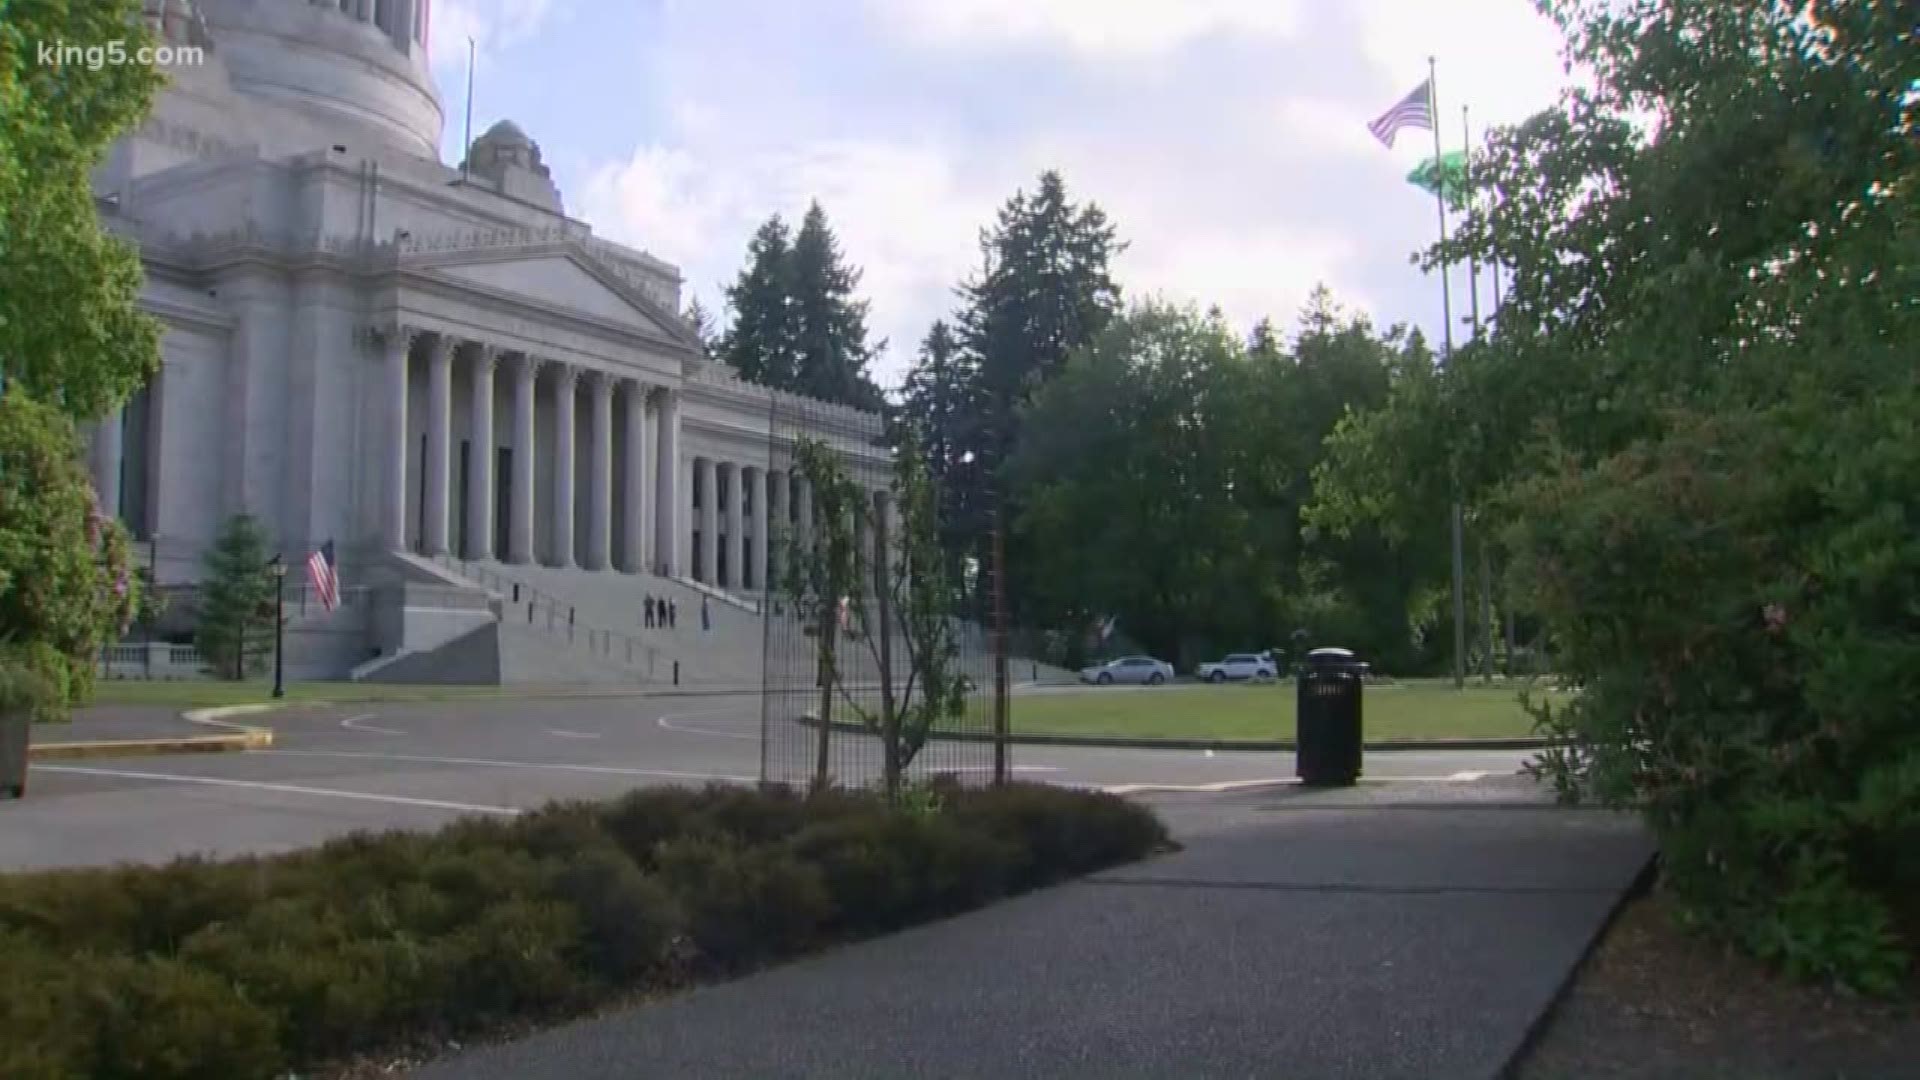 More than 250,000 workers in Washington state would be newly eligible for overtime pay by 2026 under a rule proposed Wednesday by the state's Department of Labor and Industries. KING 5's Jenna Hanchard reports.